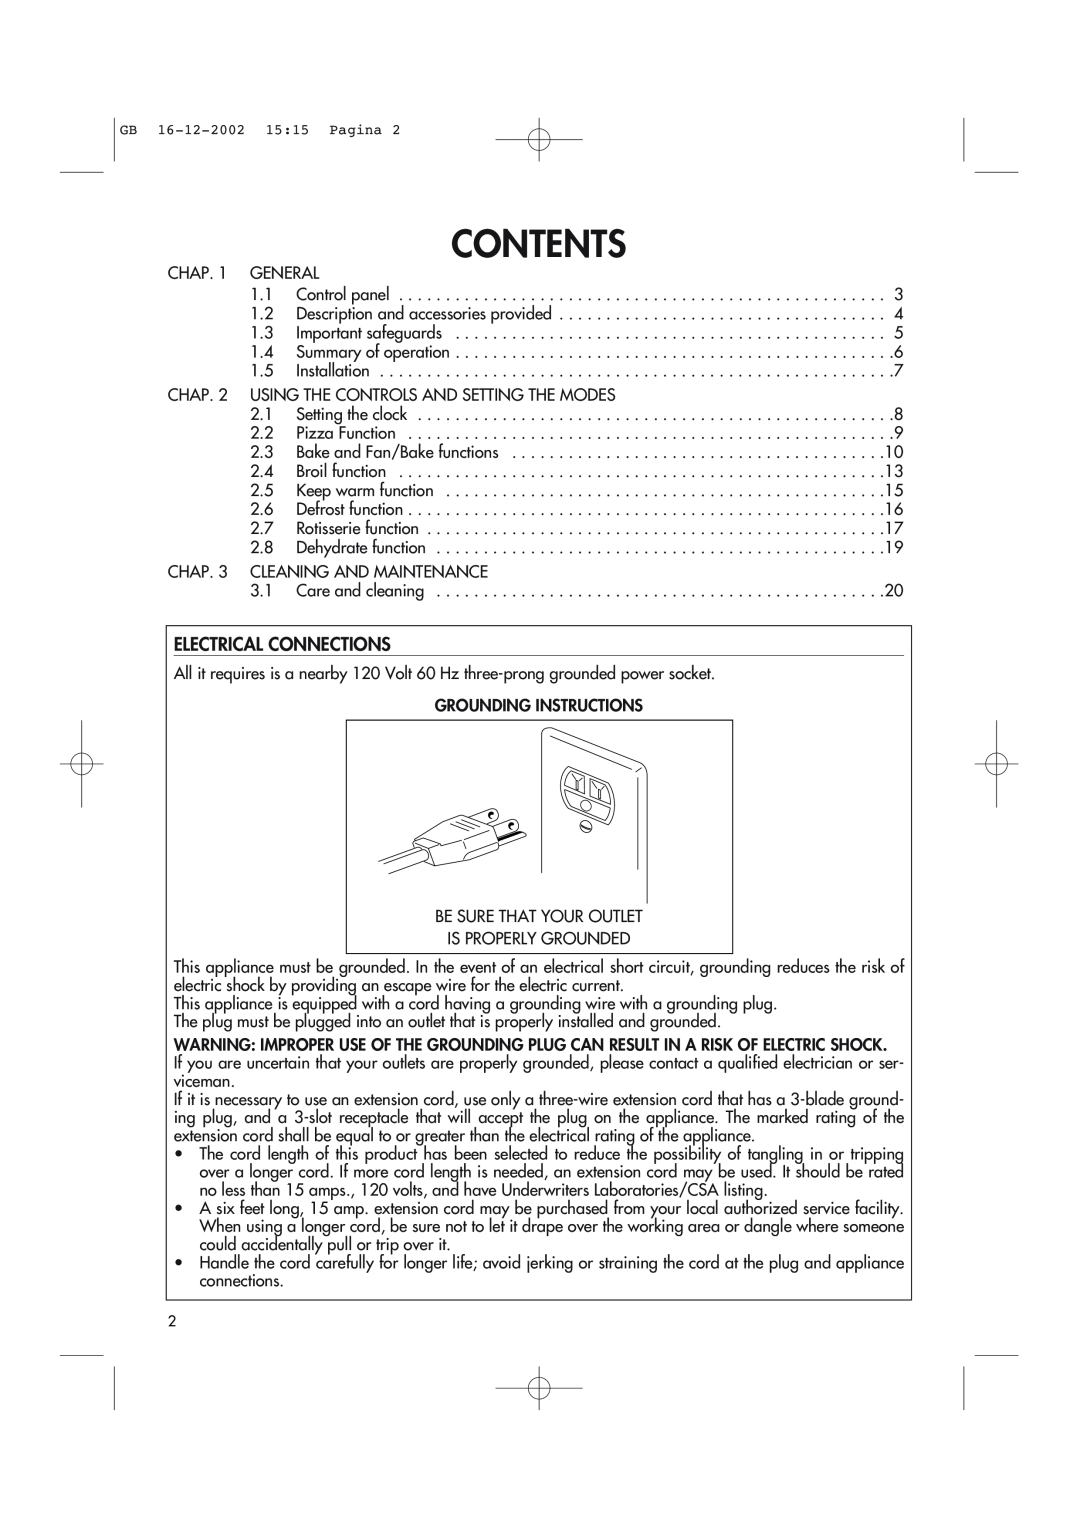 DeLonghi AD1099 manual Contents, Electrical Connections 